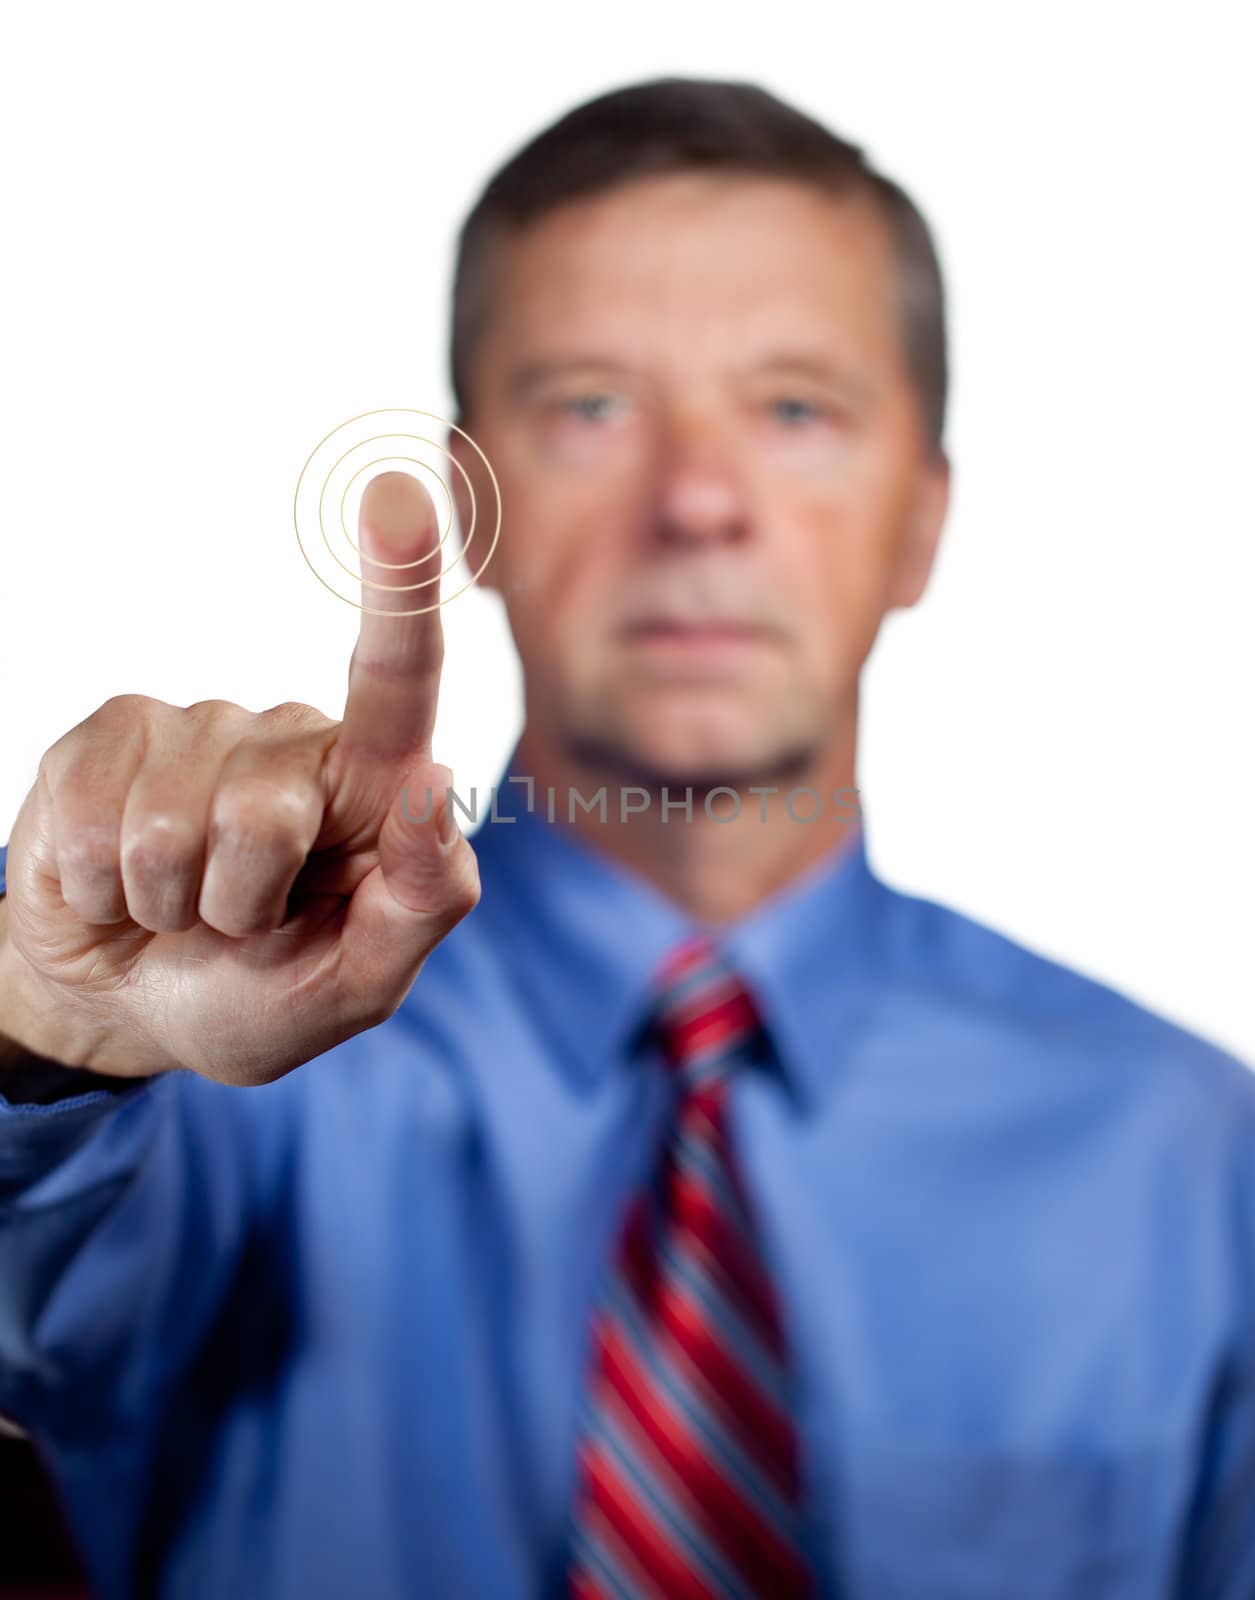 Senior executive or security man opens sensor by pressing finger onto the plate